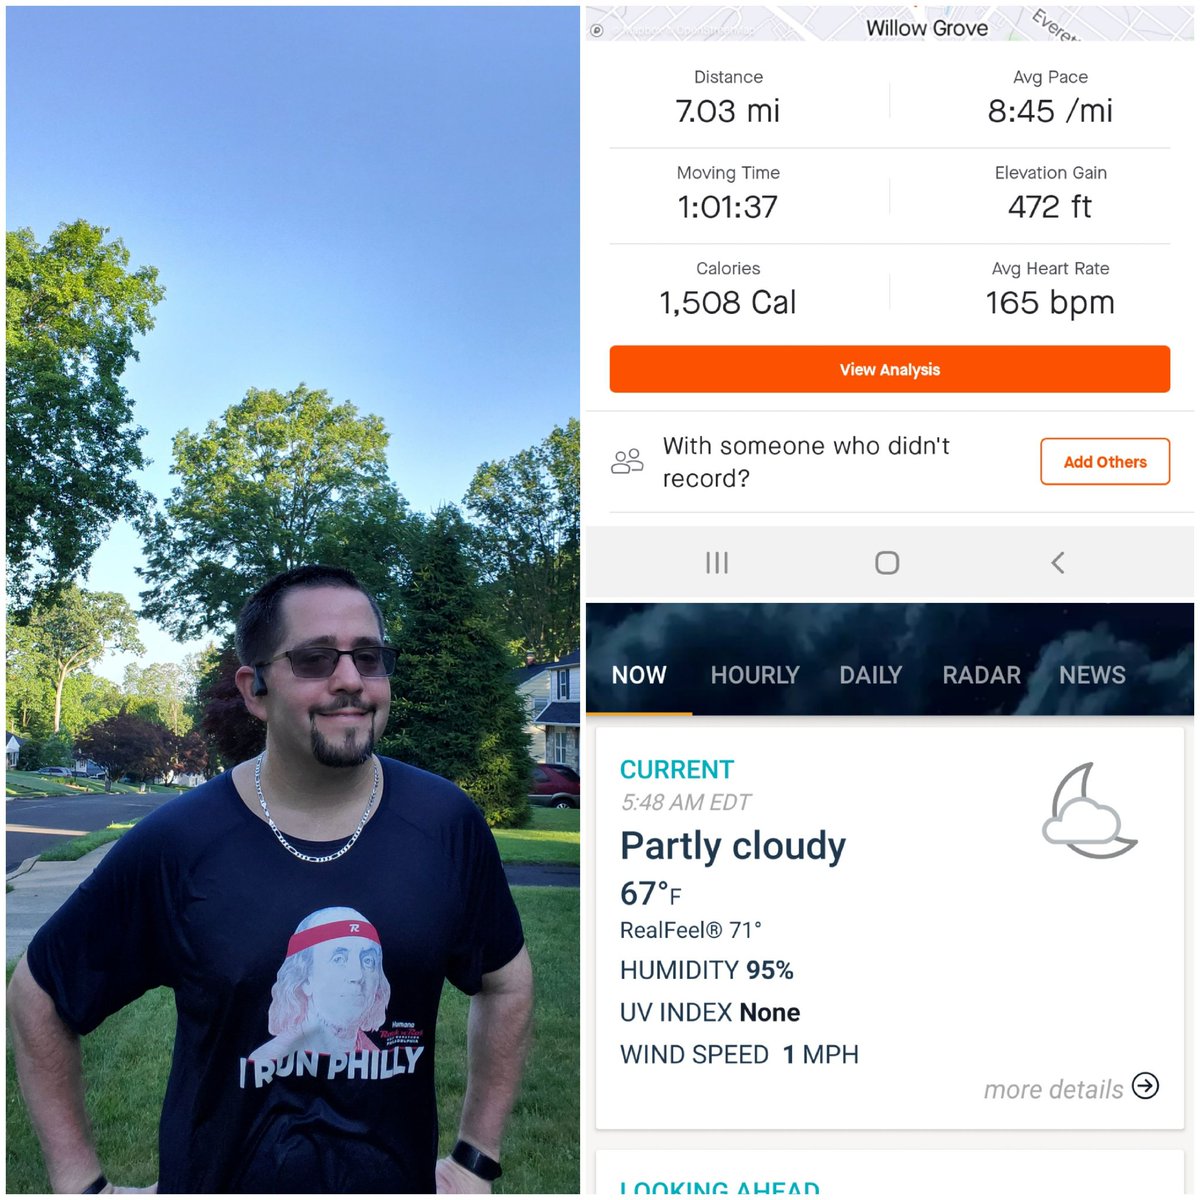 #RiseAndShine! ☕💪🏃‍♂️
Monday, we meet again. Hills and humidity, fun times! 🤣
Have a great day everyone, be safe!
#BibChat #RunChat #GVRAT1000K 
#100kstepchallenge